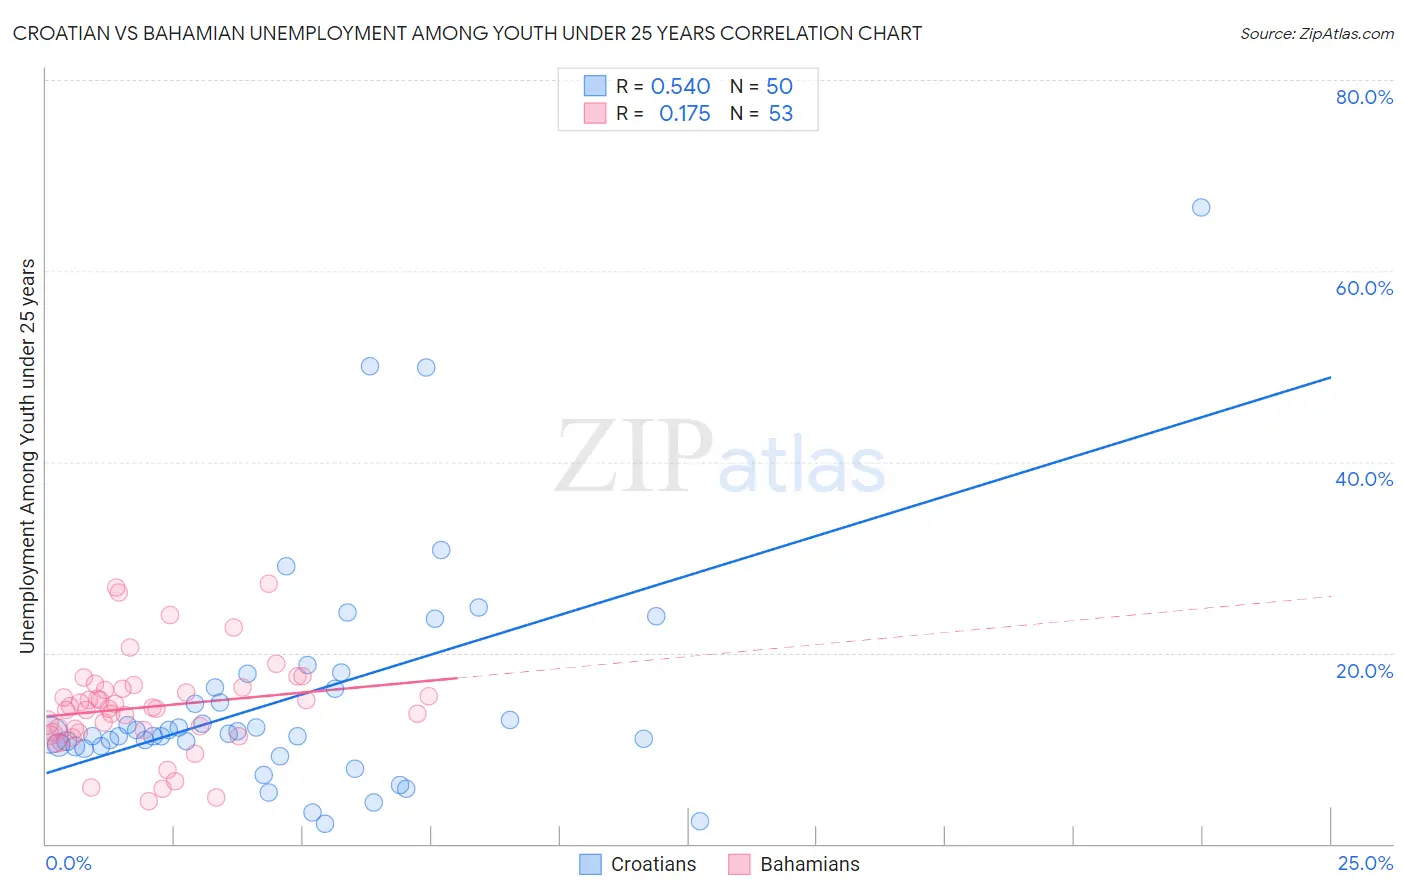 Croatian vs Bahamian Unemployment Among Youth under 25 years